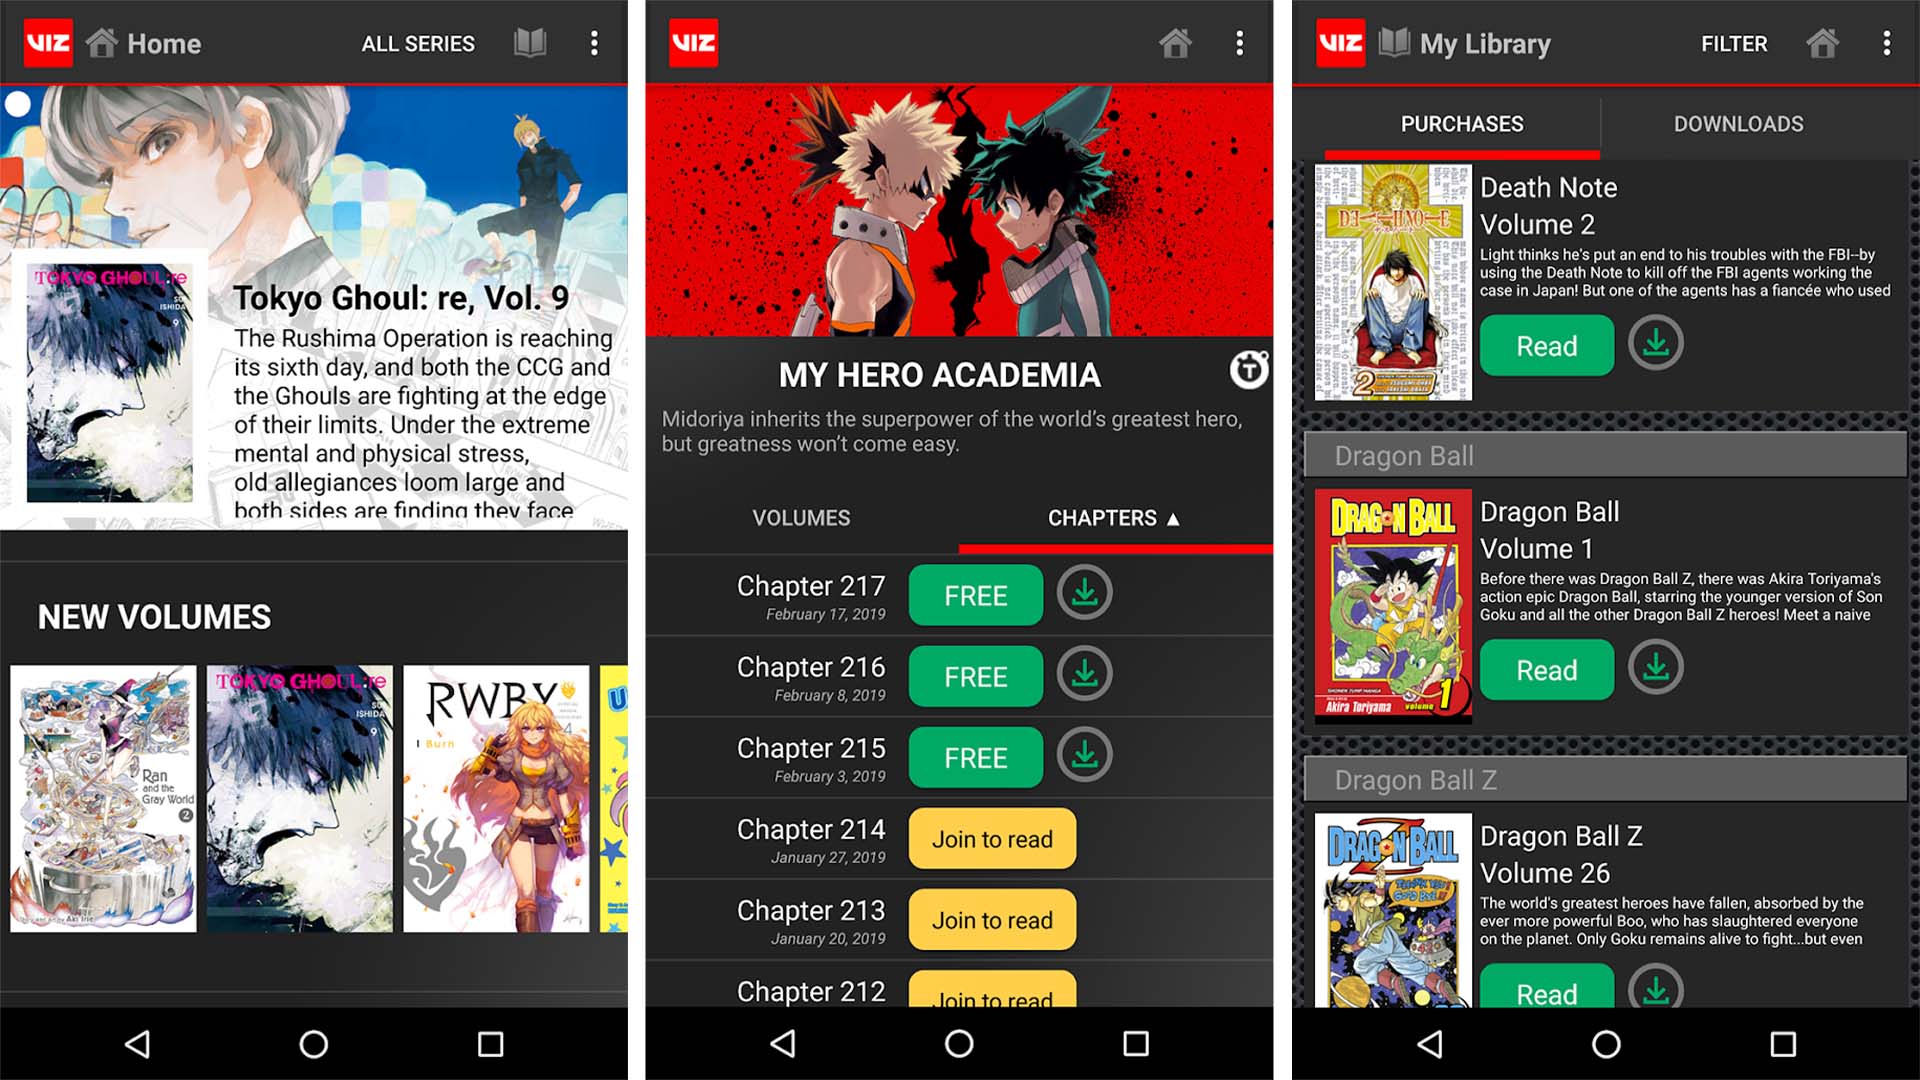 Best anime Streaming and Downloading app ever Anyme App  nextpit Forum